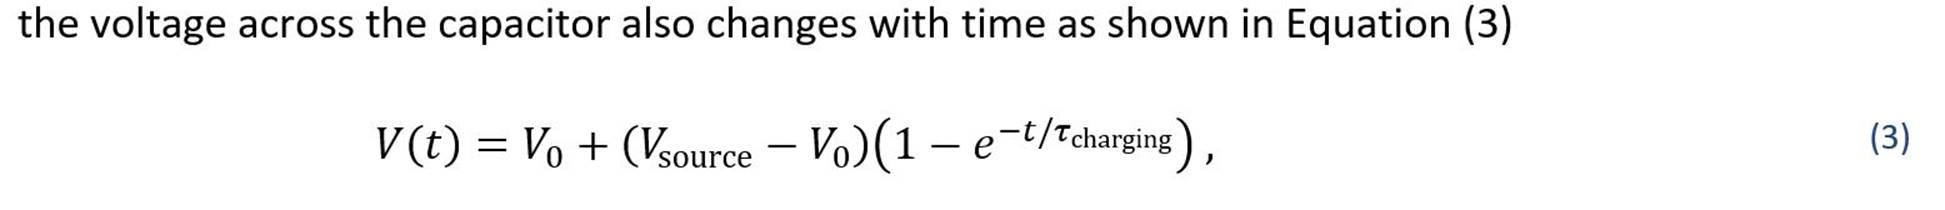 the voltage across the capacitor also changes with time as shown in Equation (3) V(t) = V + (Vsource -